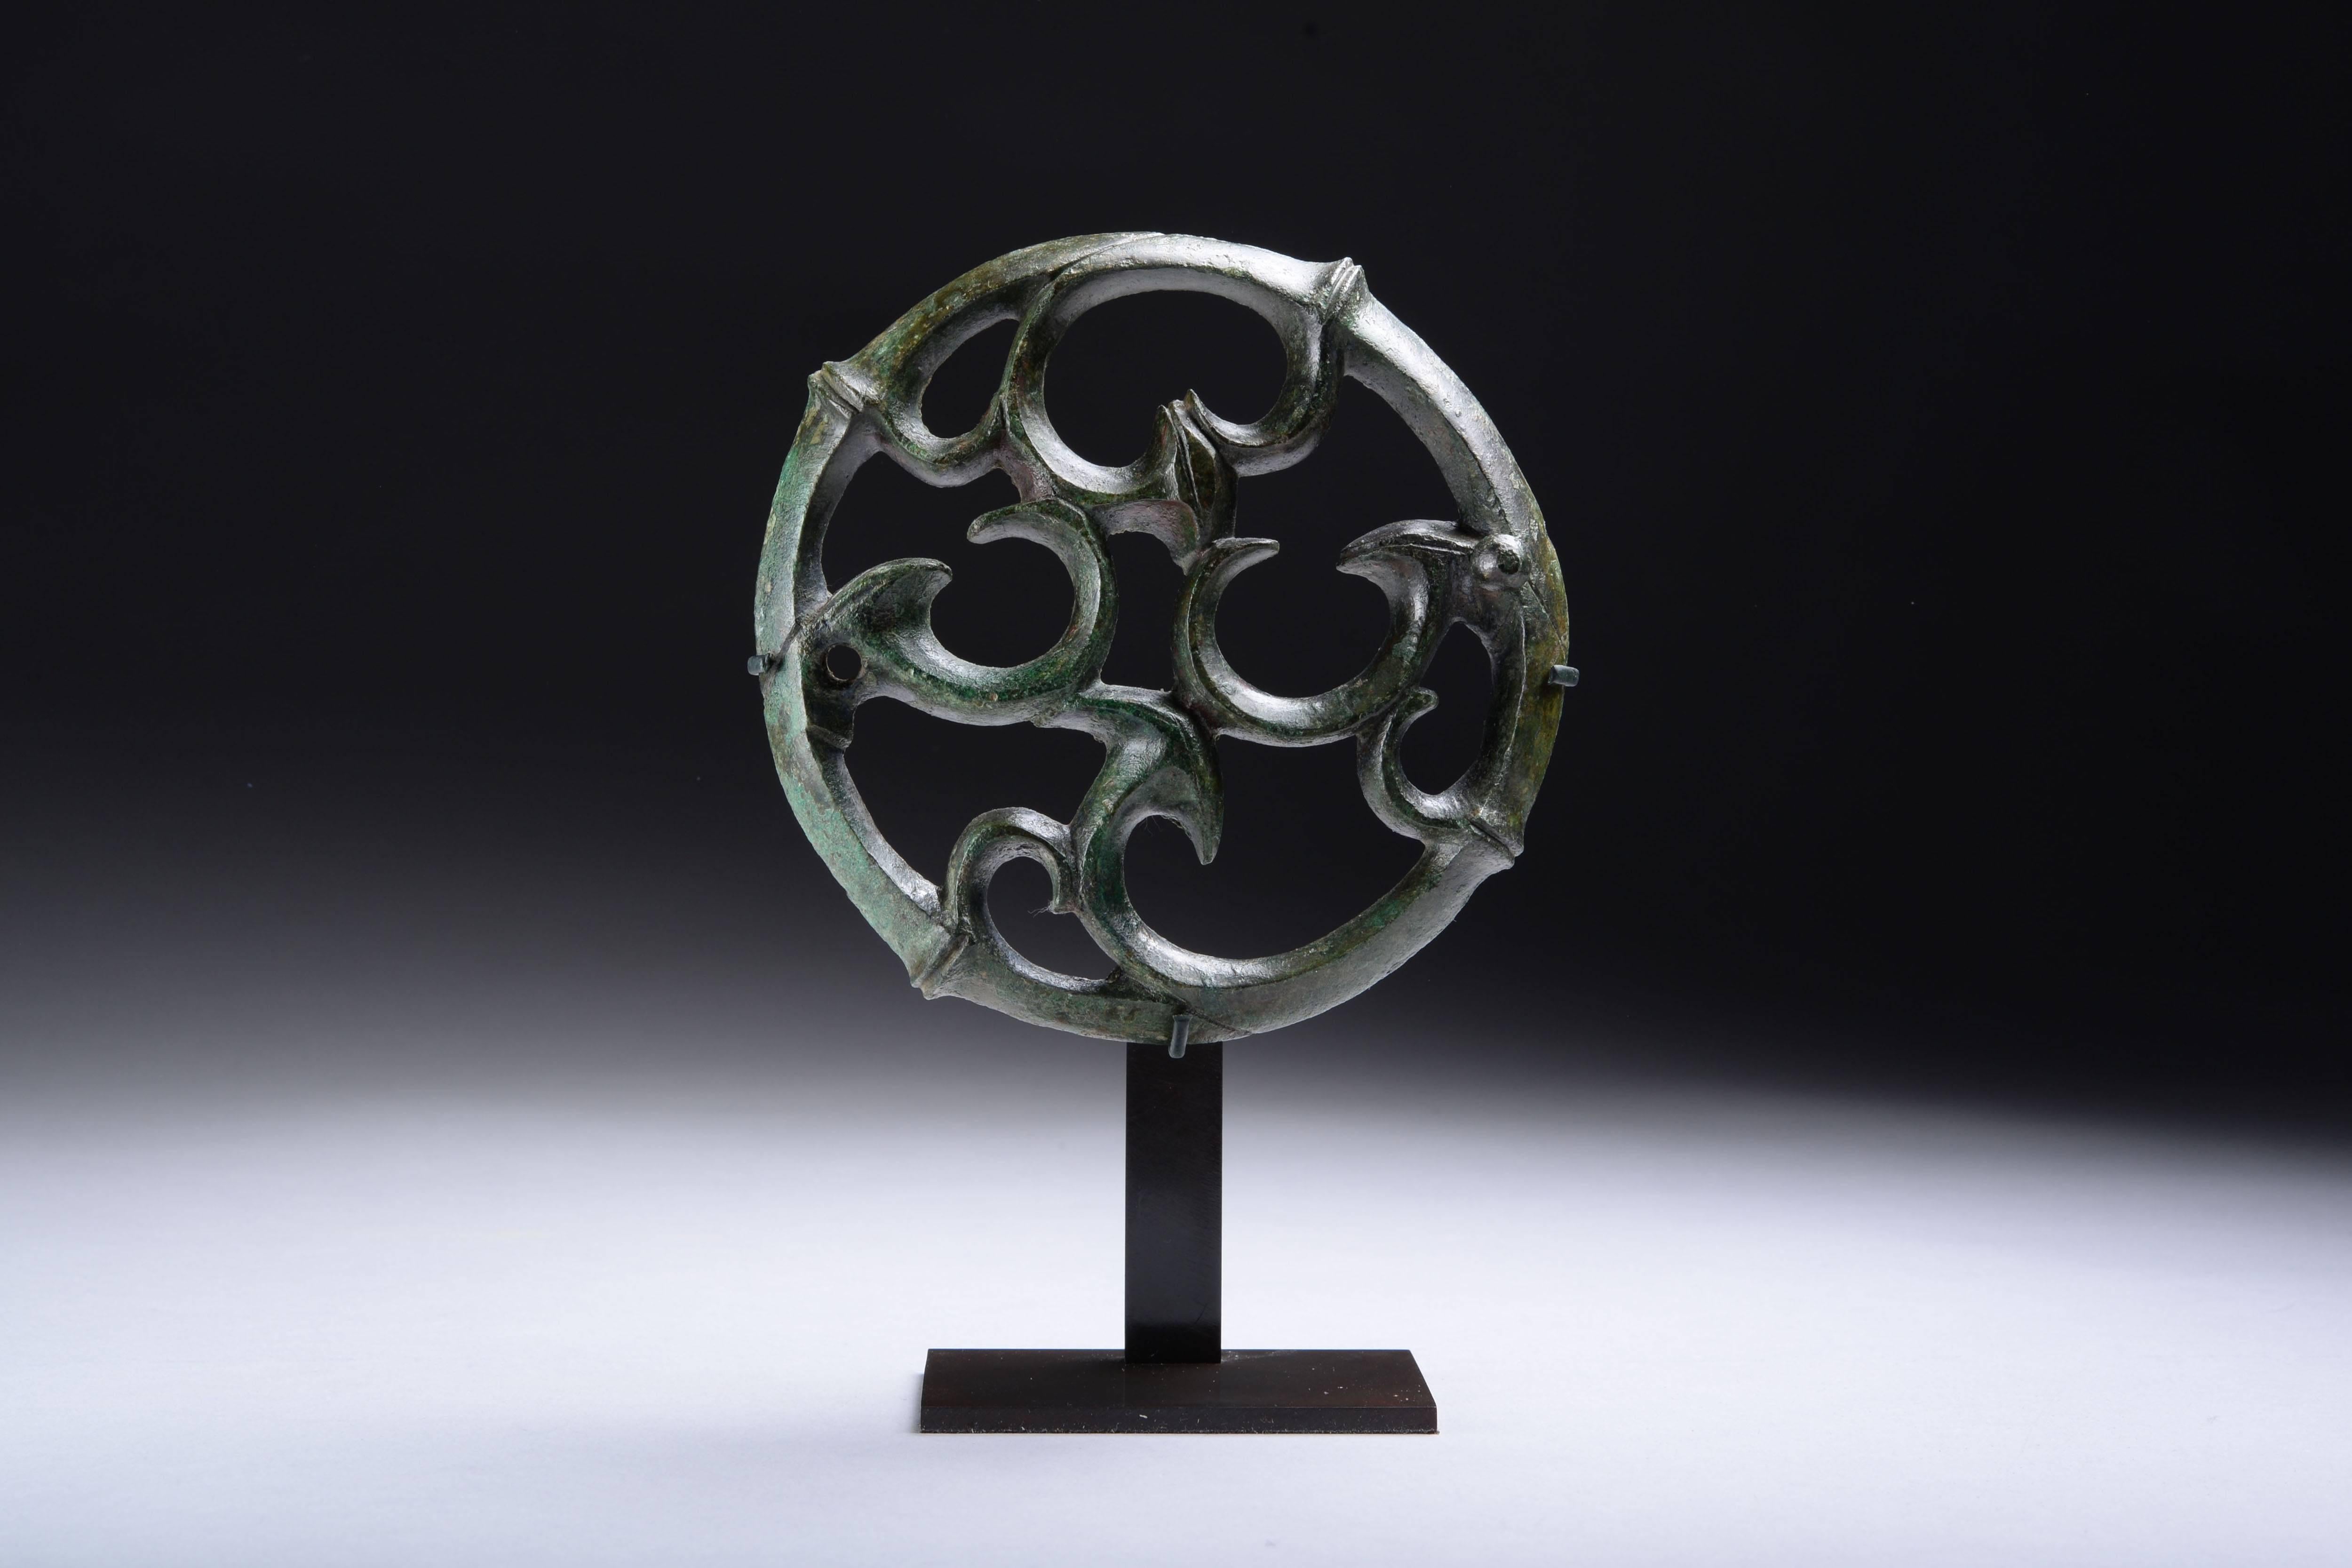 An ancient Roman bronze fitting, perhaps from a chariot or an embellishment from a piece of furniture, dating to the 1st-3rd Century AD

The style is reminiscent of Celtic La Tene art, with its organic, curvilinear forms, suggesting that this may